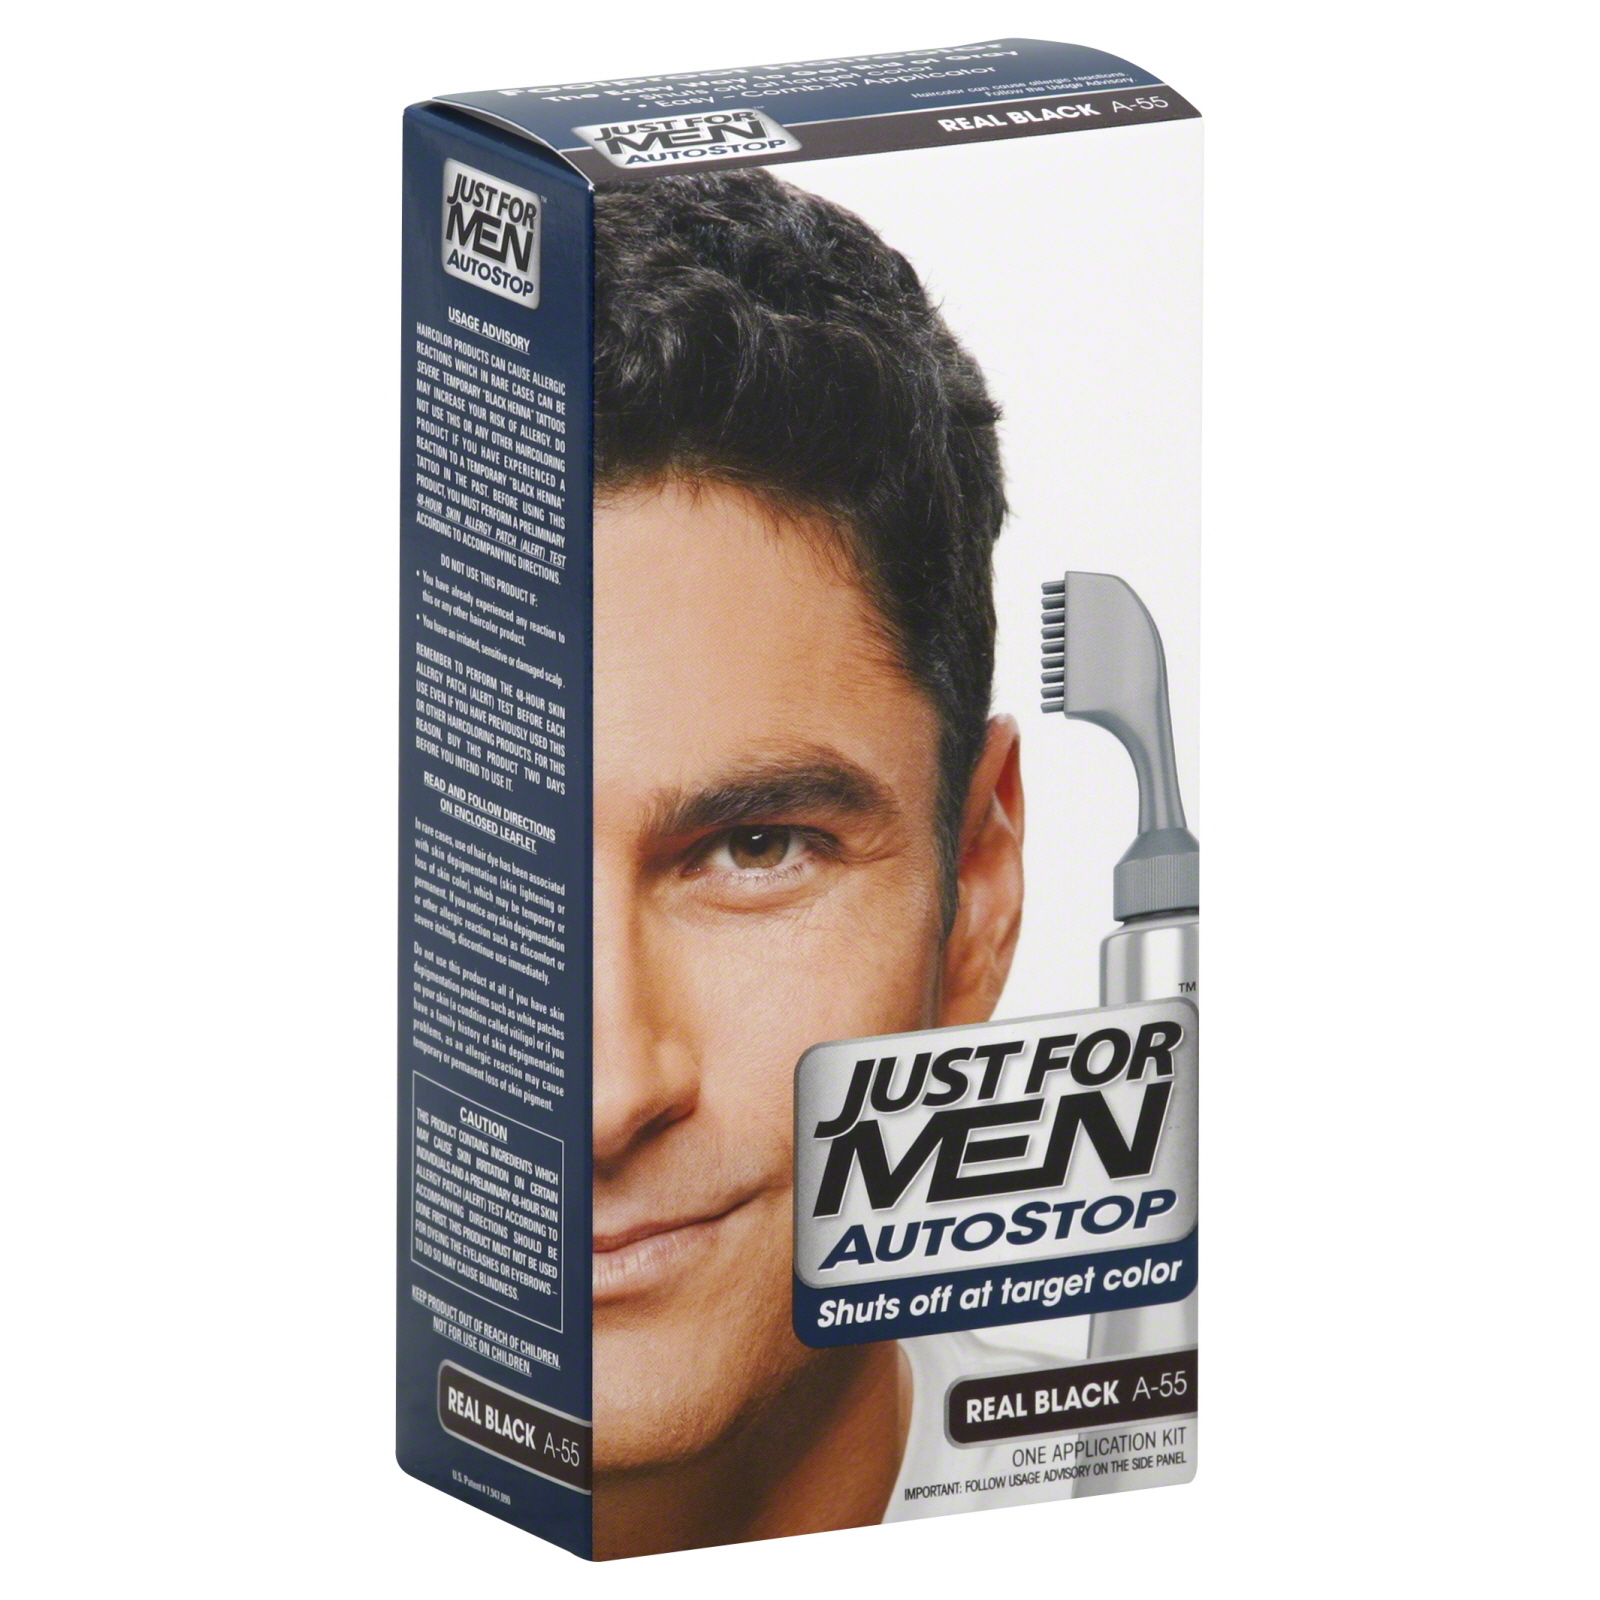 Just For Men Auto Stop Foolproof Hair Color Real Black A-55